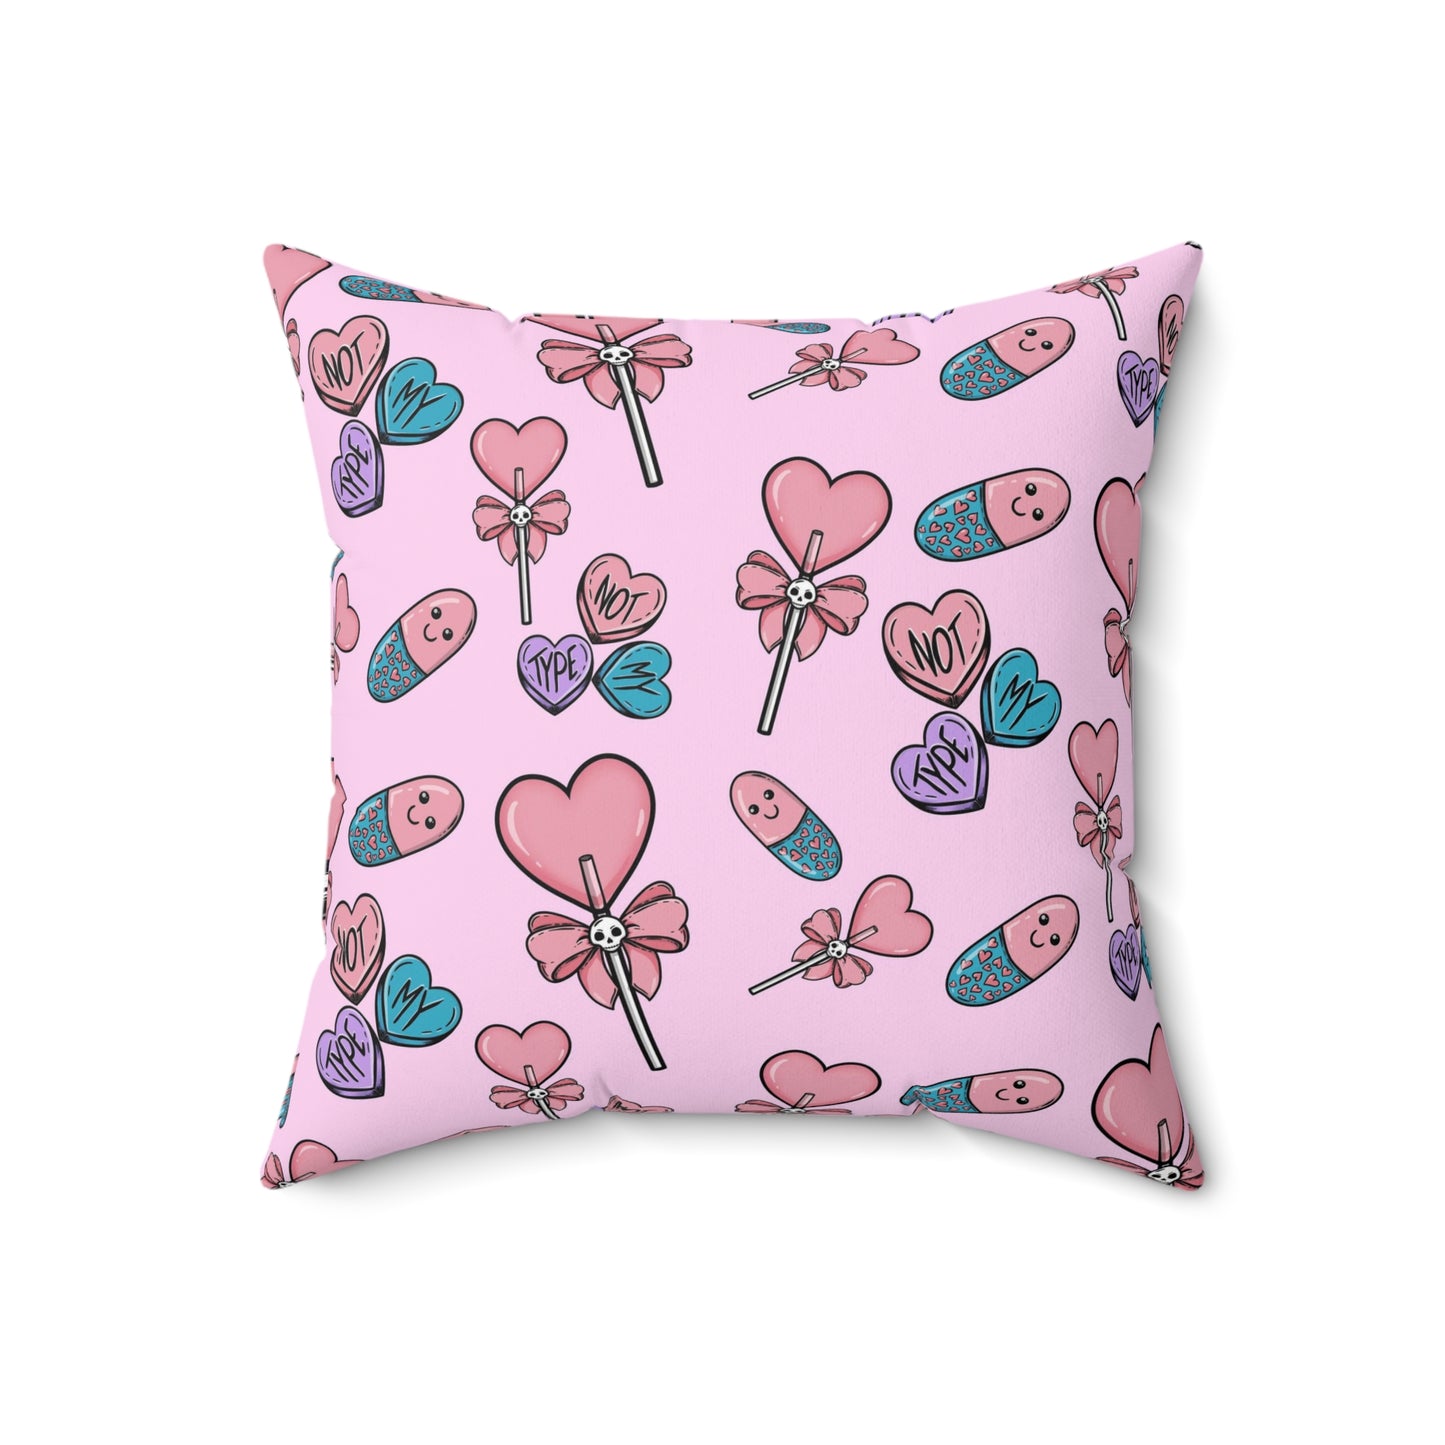 Pastel Goth Valentine's Day Pillow and Pillow Cover Pillow Spun Polyester Square Pillow